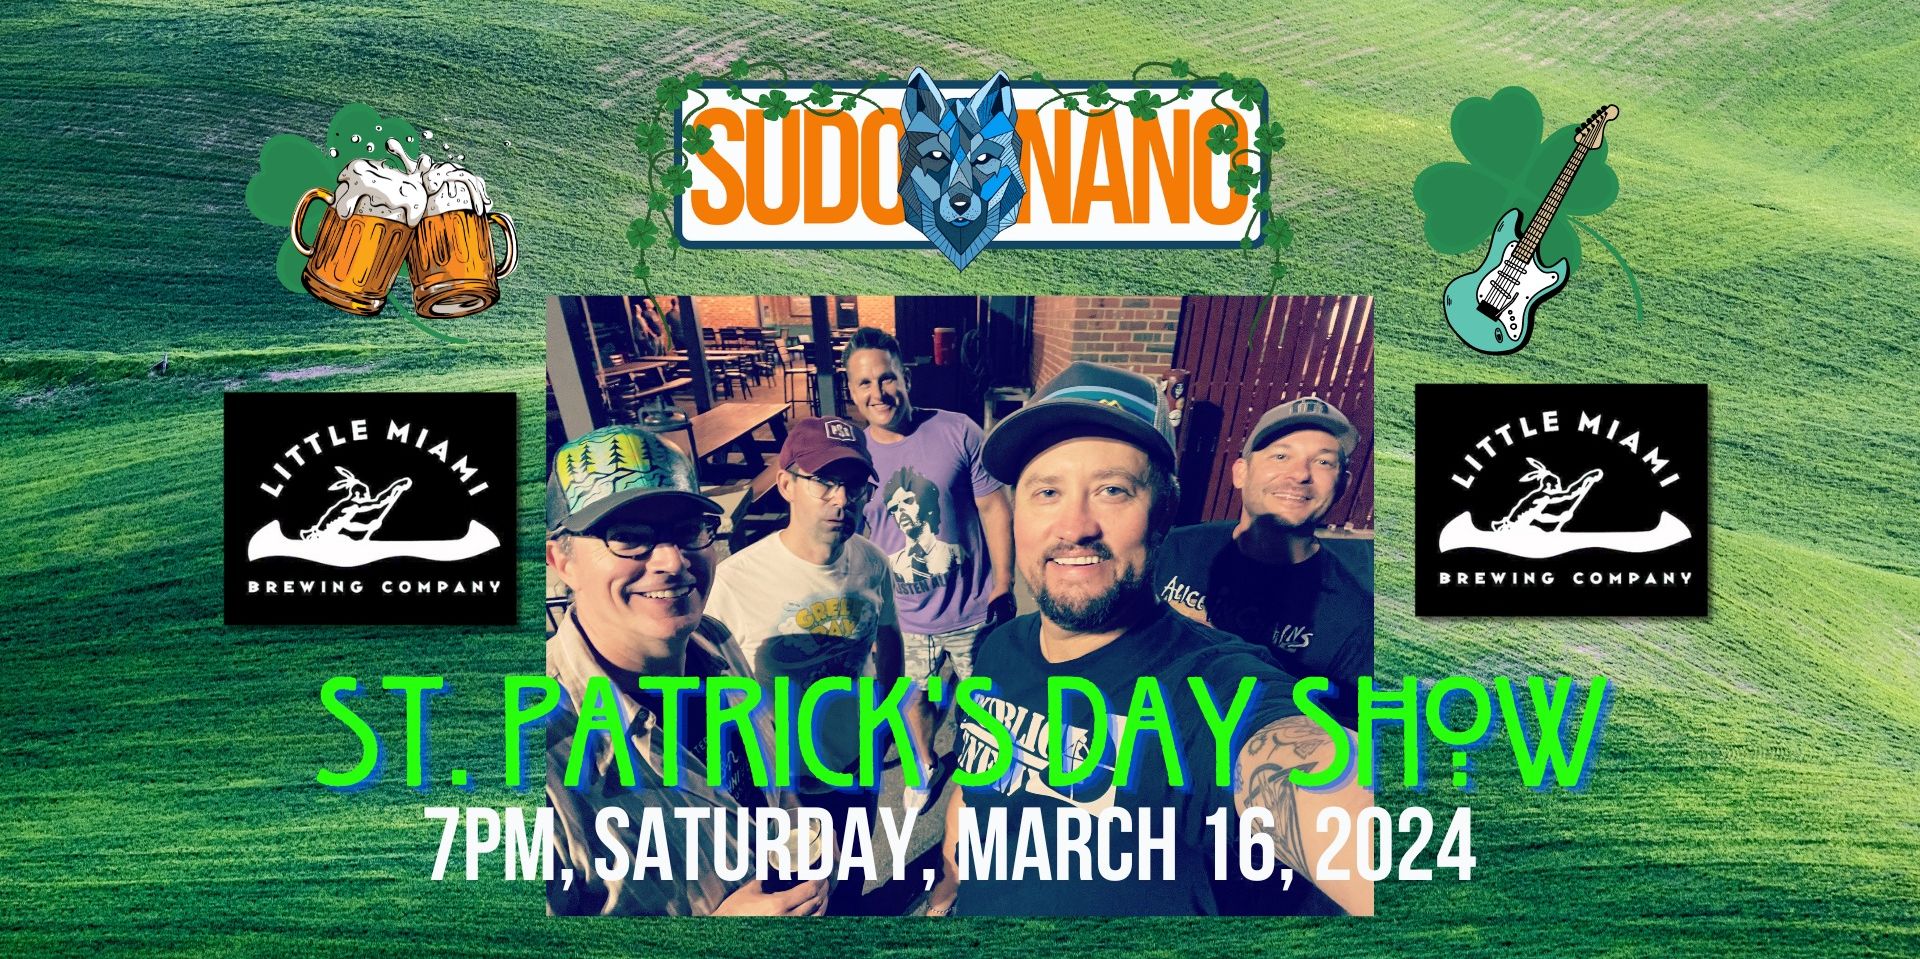 Sudo Nano St. Patty's Day Celebration Show at the Little Miami Brewing Company! promotional image